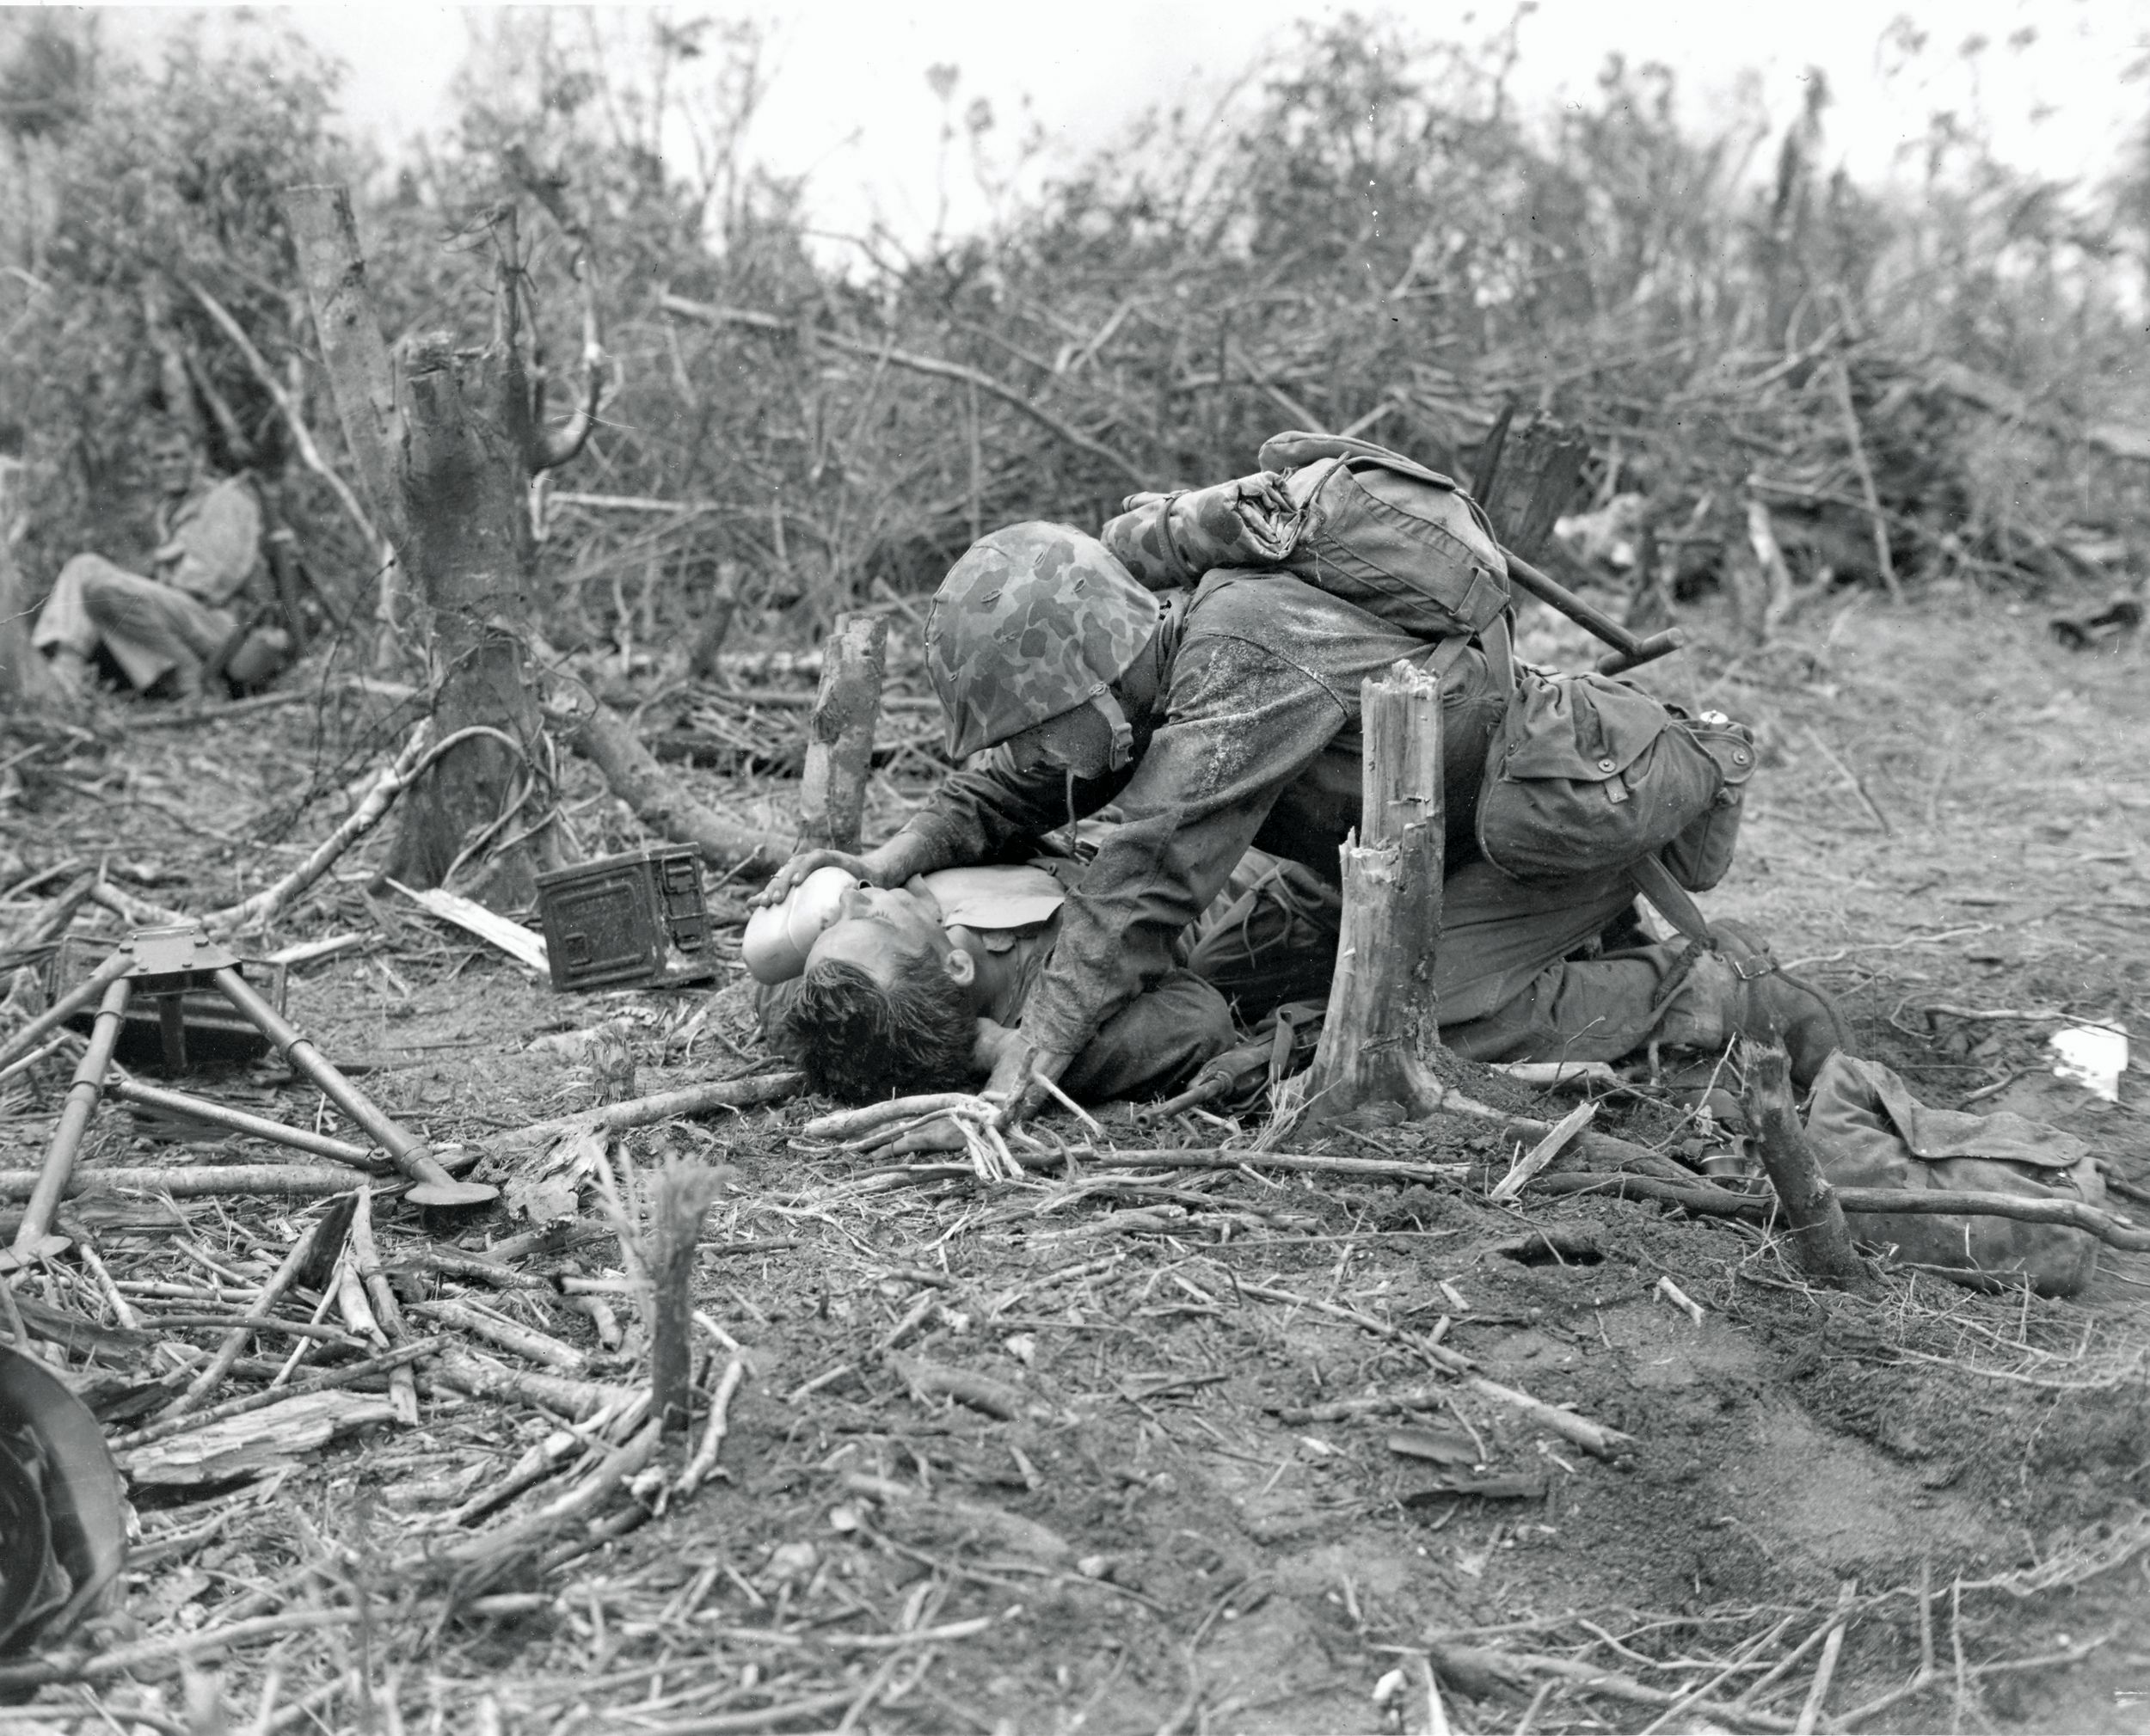 A Marine shares his water with a badly wounded fellow Marine during the fight for Peleliu. Although less well known than Guadalcanal, Iwo Jima, and Okinawa, the battle was no less brutal.